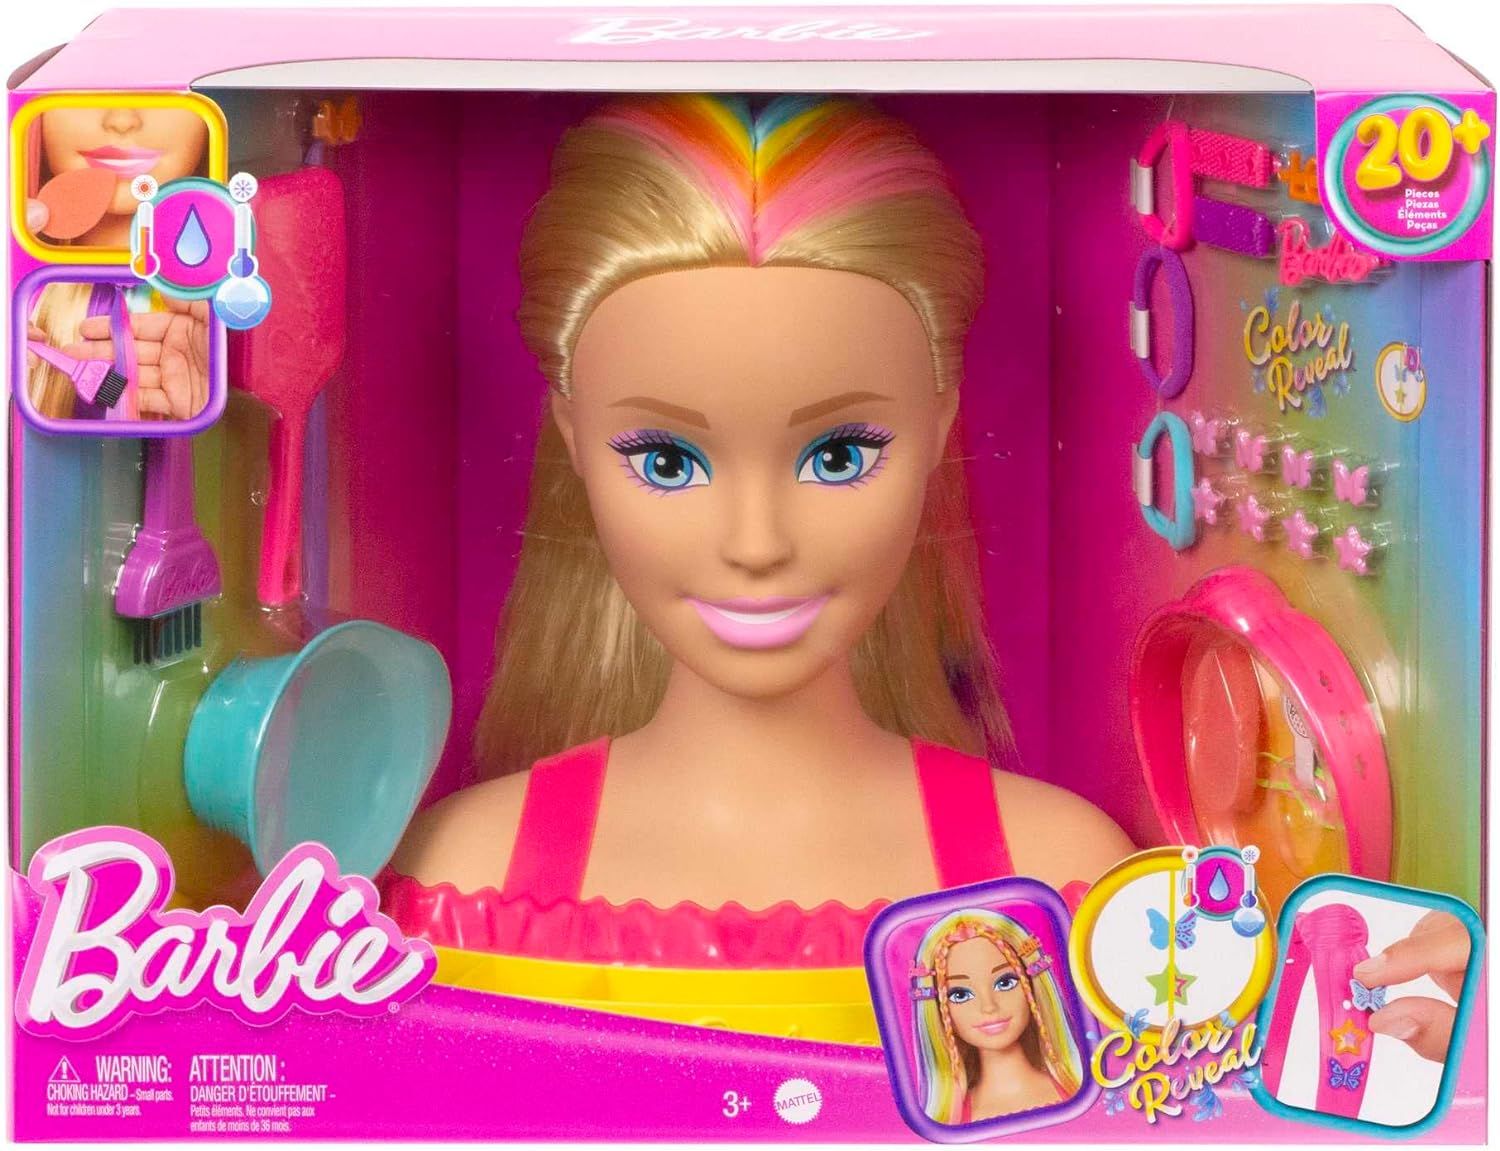 Barbie Hairstyle capelli arcobaleno